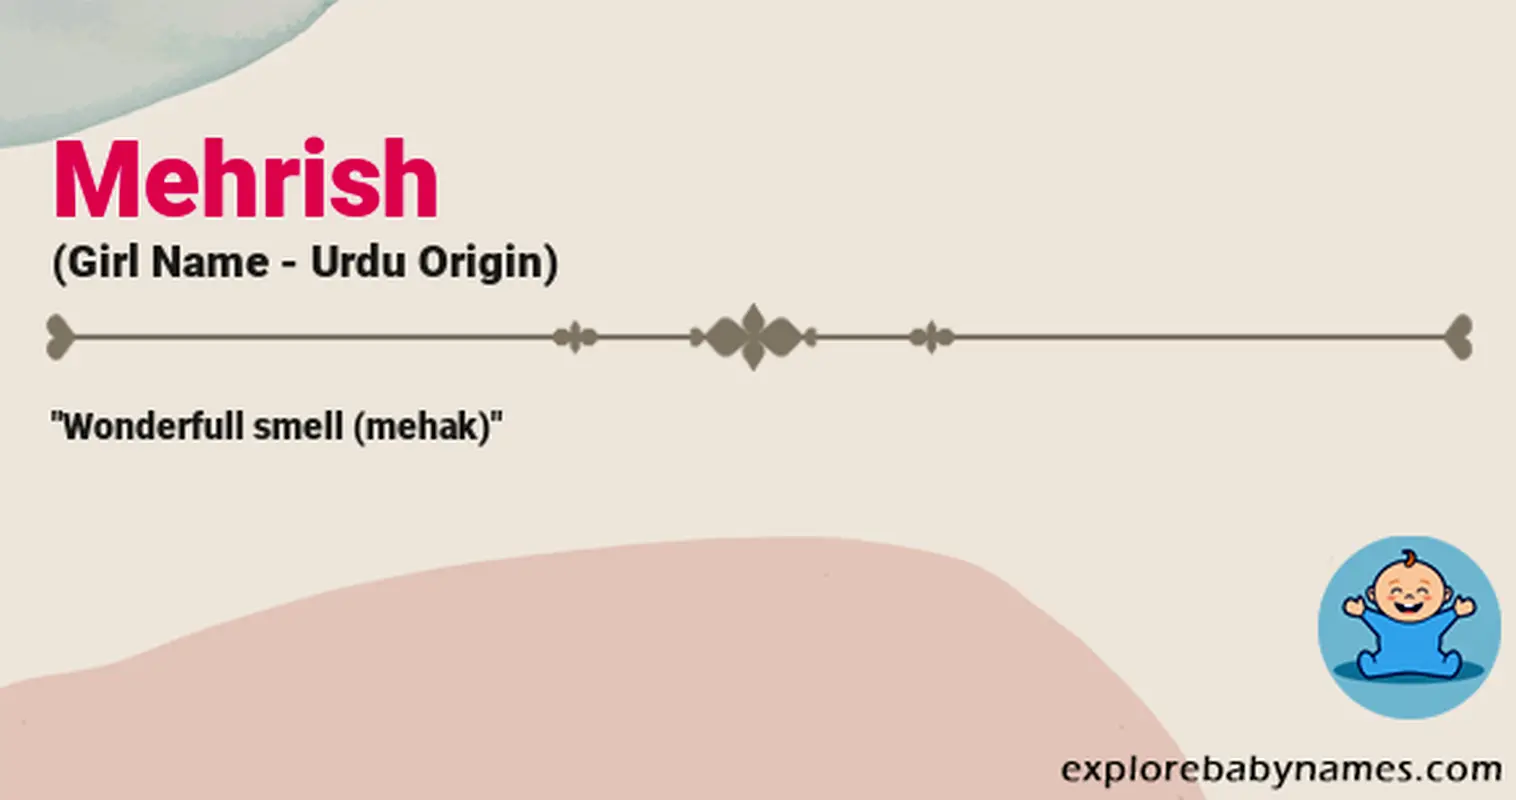 Meaning of Mehrish